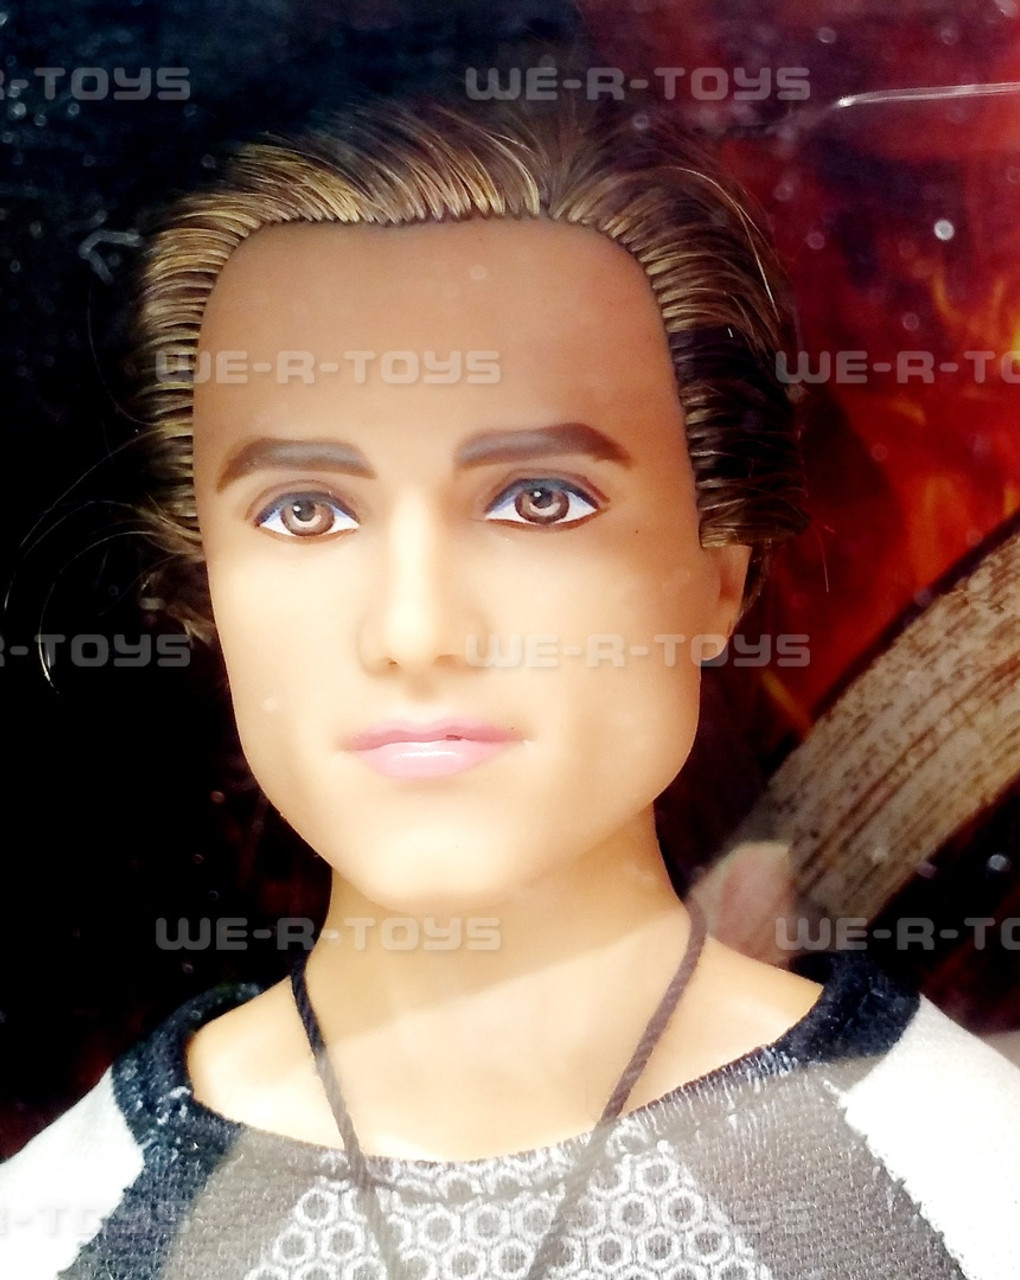 Barbie Collector The Hunger Games Catching Fire Peeta Doll Black Label  Mattel - We-R-Toys